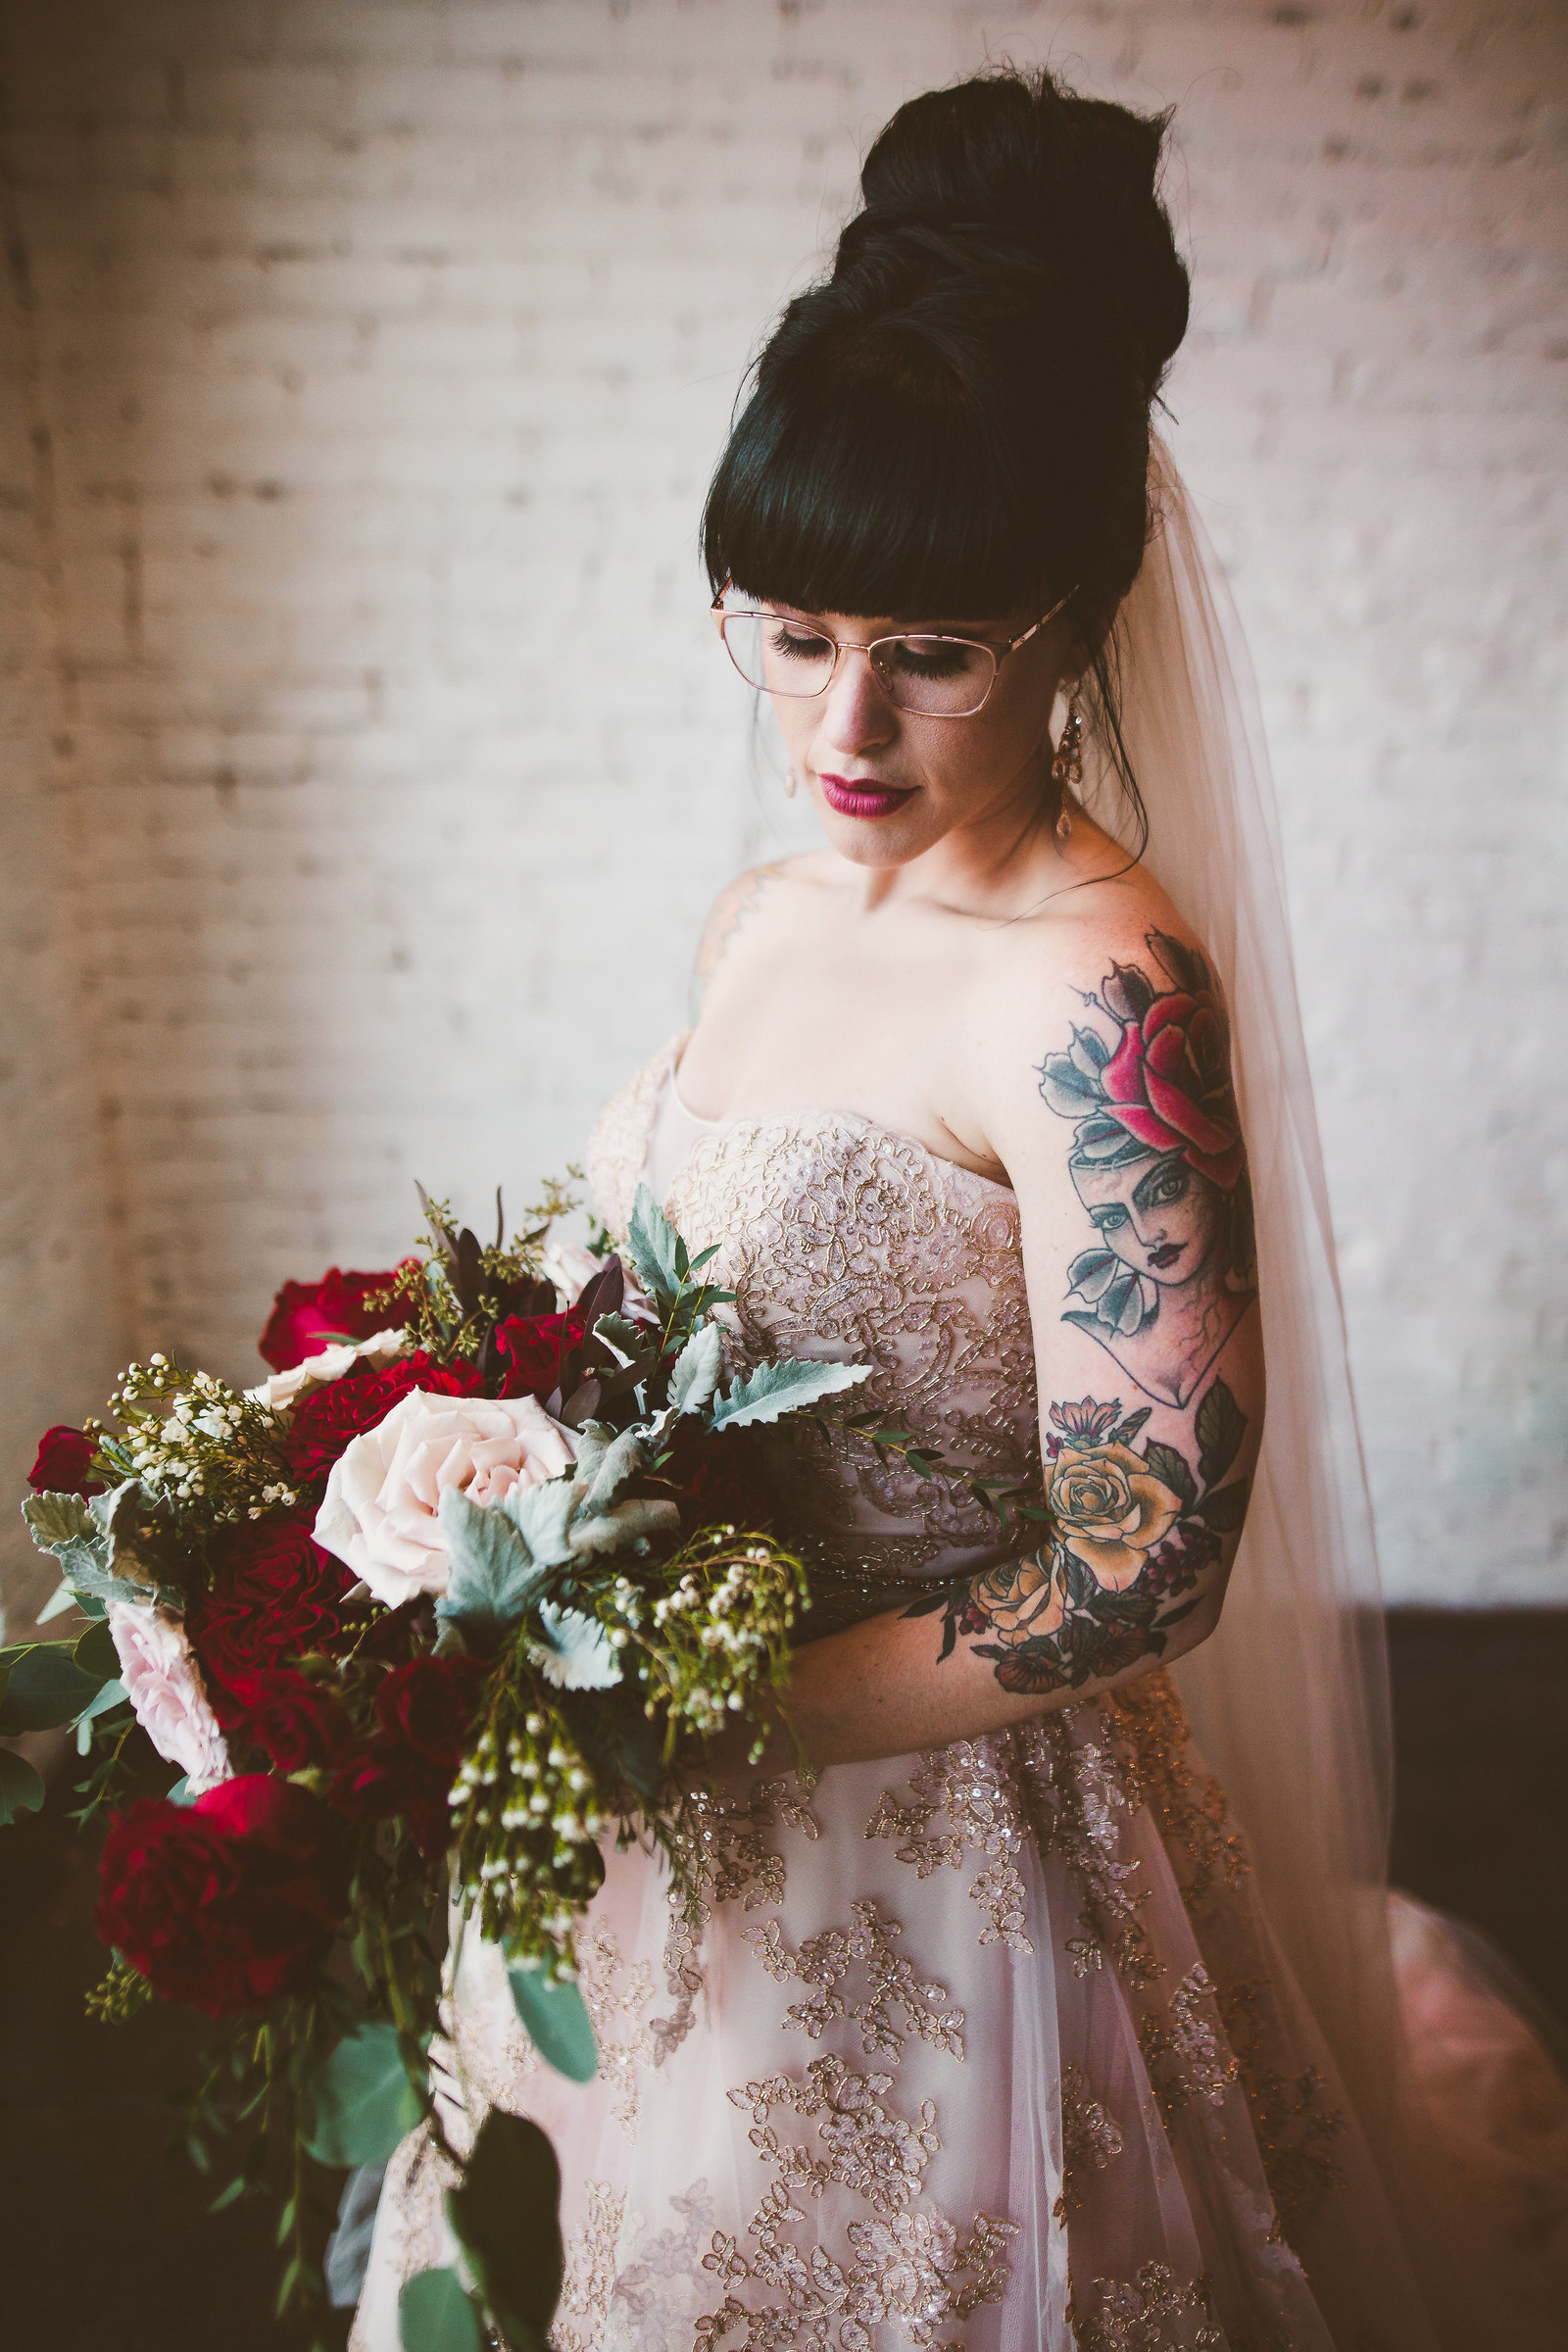 17 Tattooed Brides That Will Inspire You To Get Inked Before Your Wedding Day